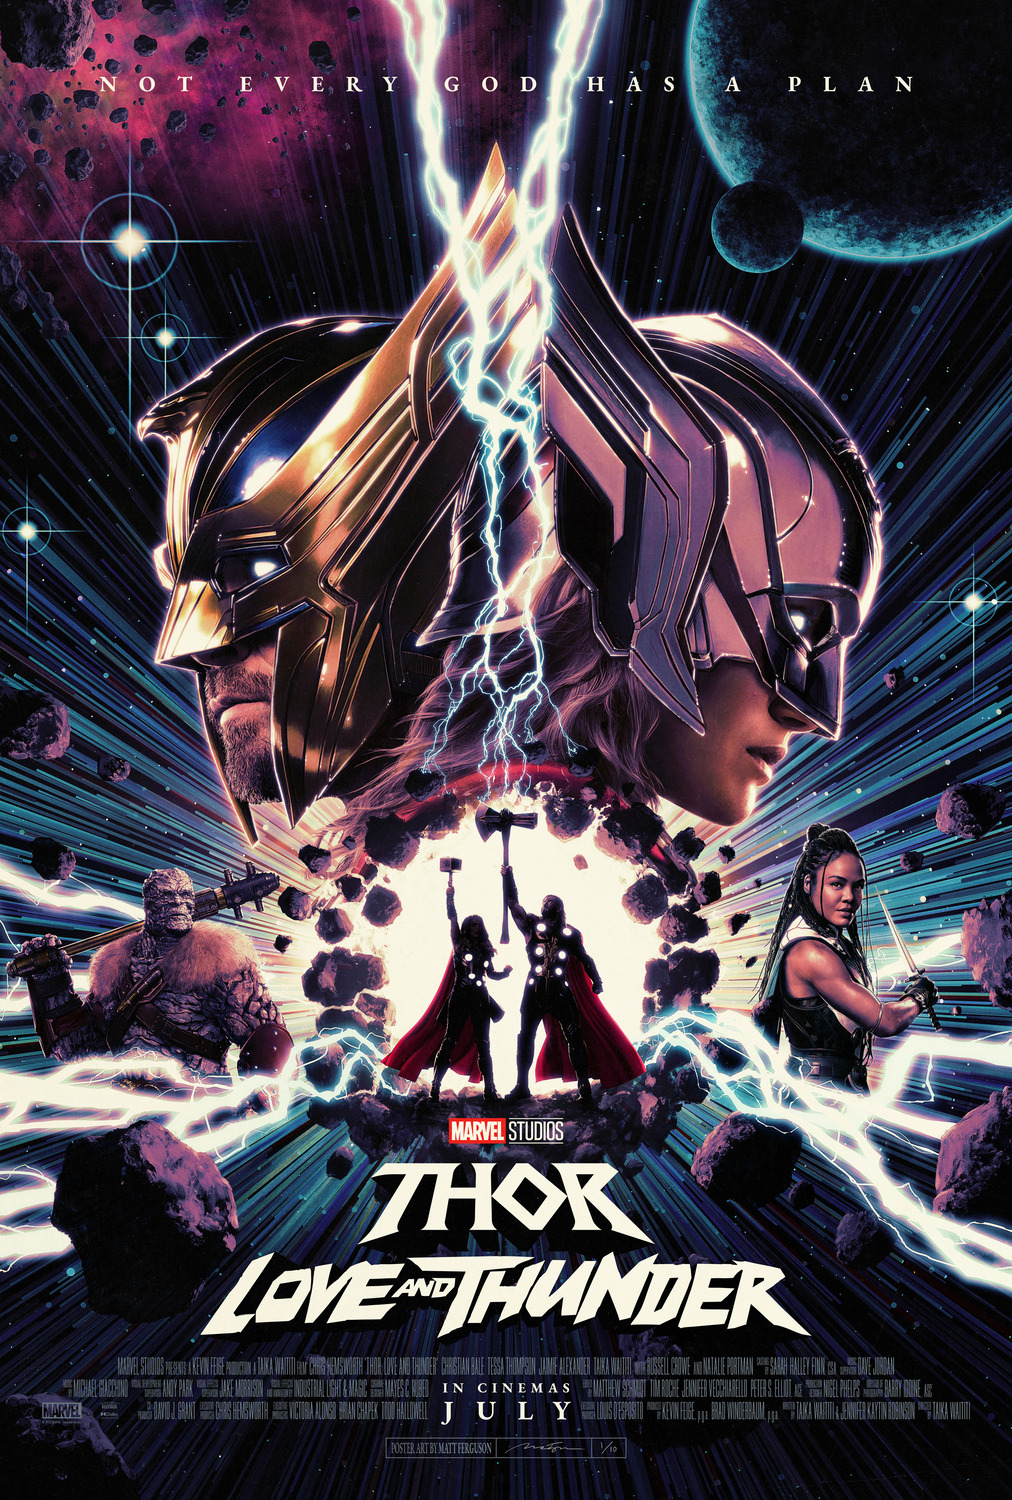 THOR: LOVE AND THUNDER – The Red Right Hand Movie Reviews [Matthew Stogdon]